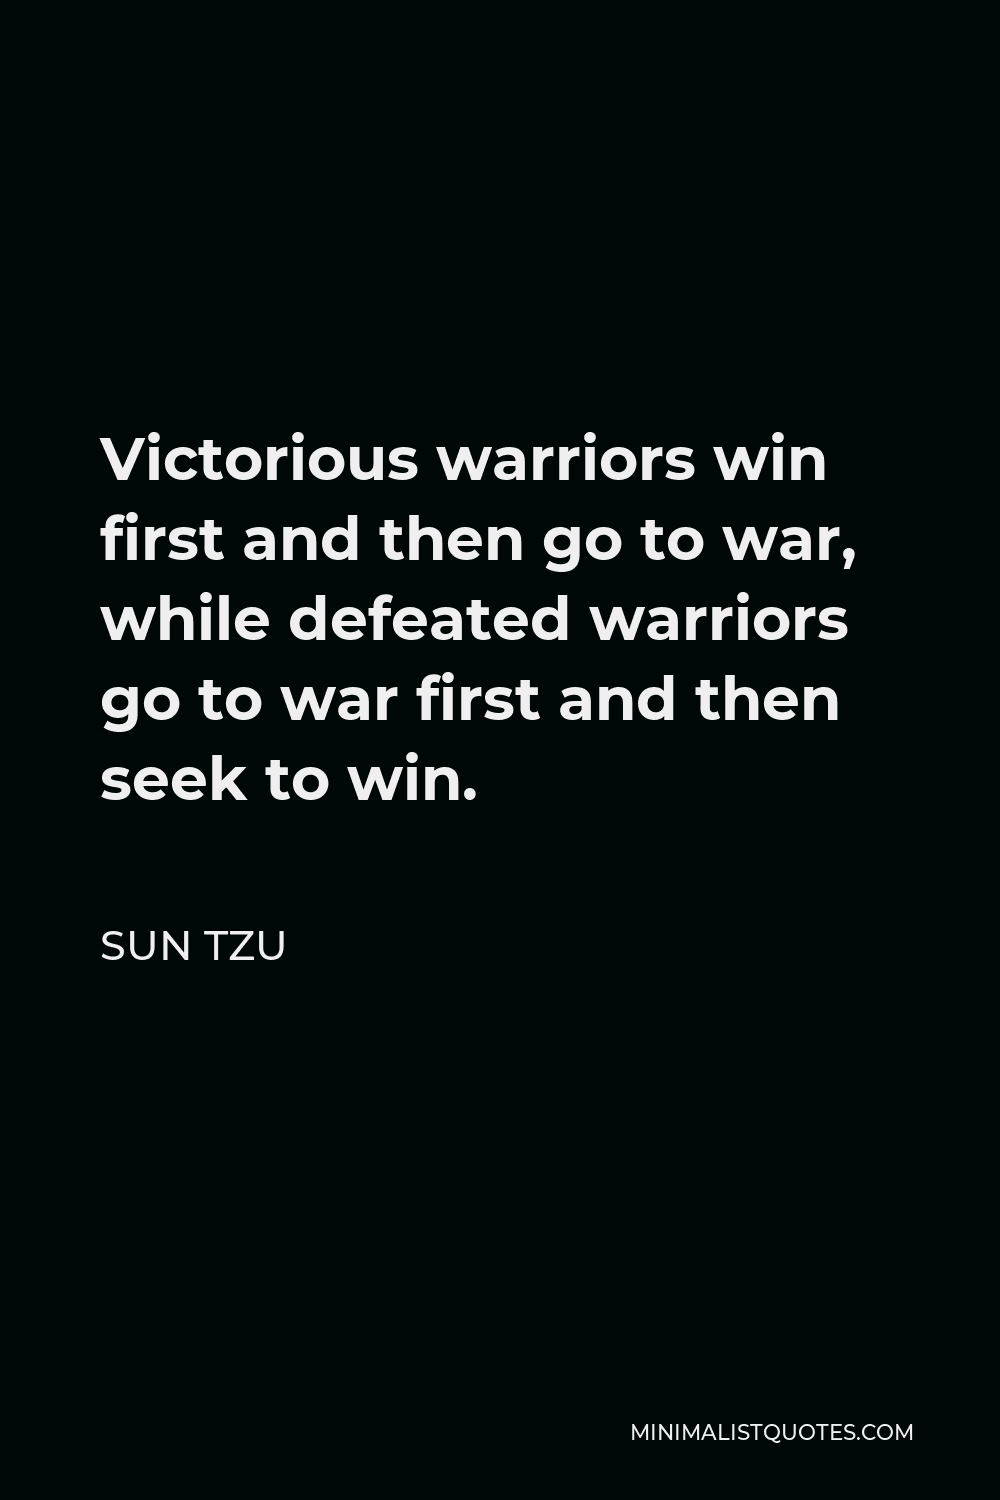 Sun Tzu Quote - Victorious warriors win first and then go to war, while defeated warriors go to war first and then seek to win.